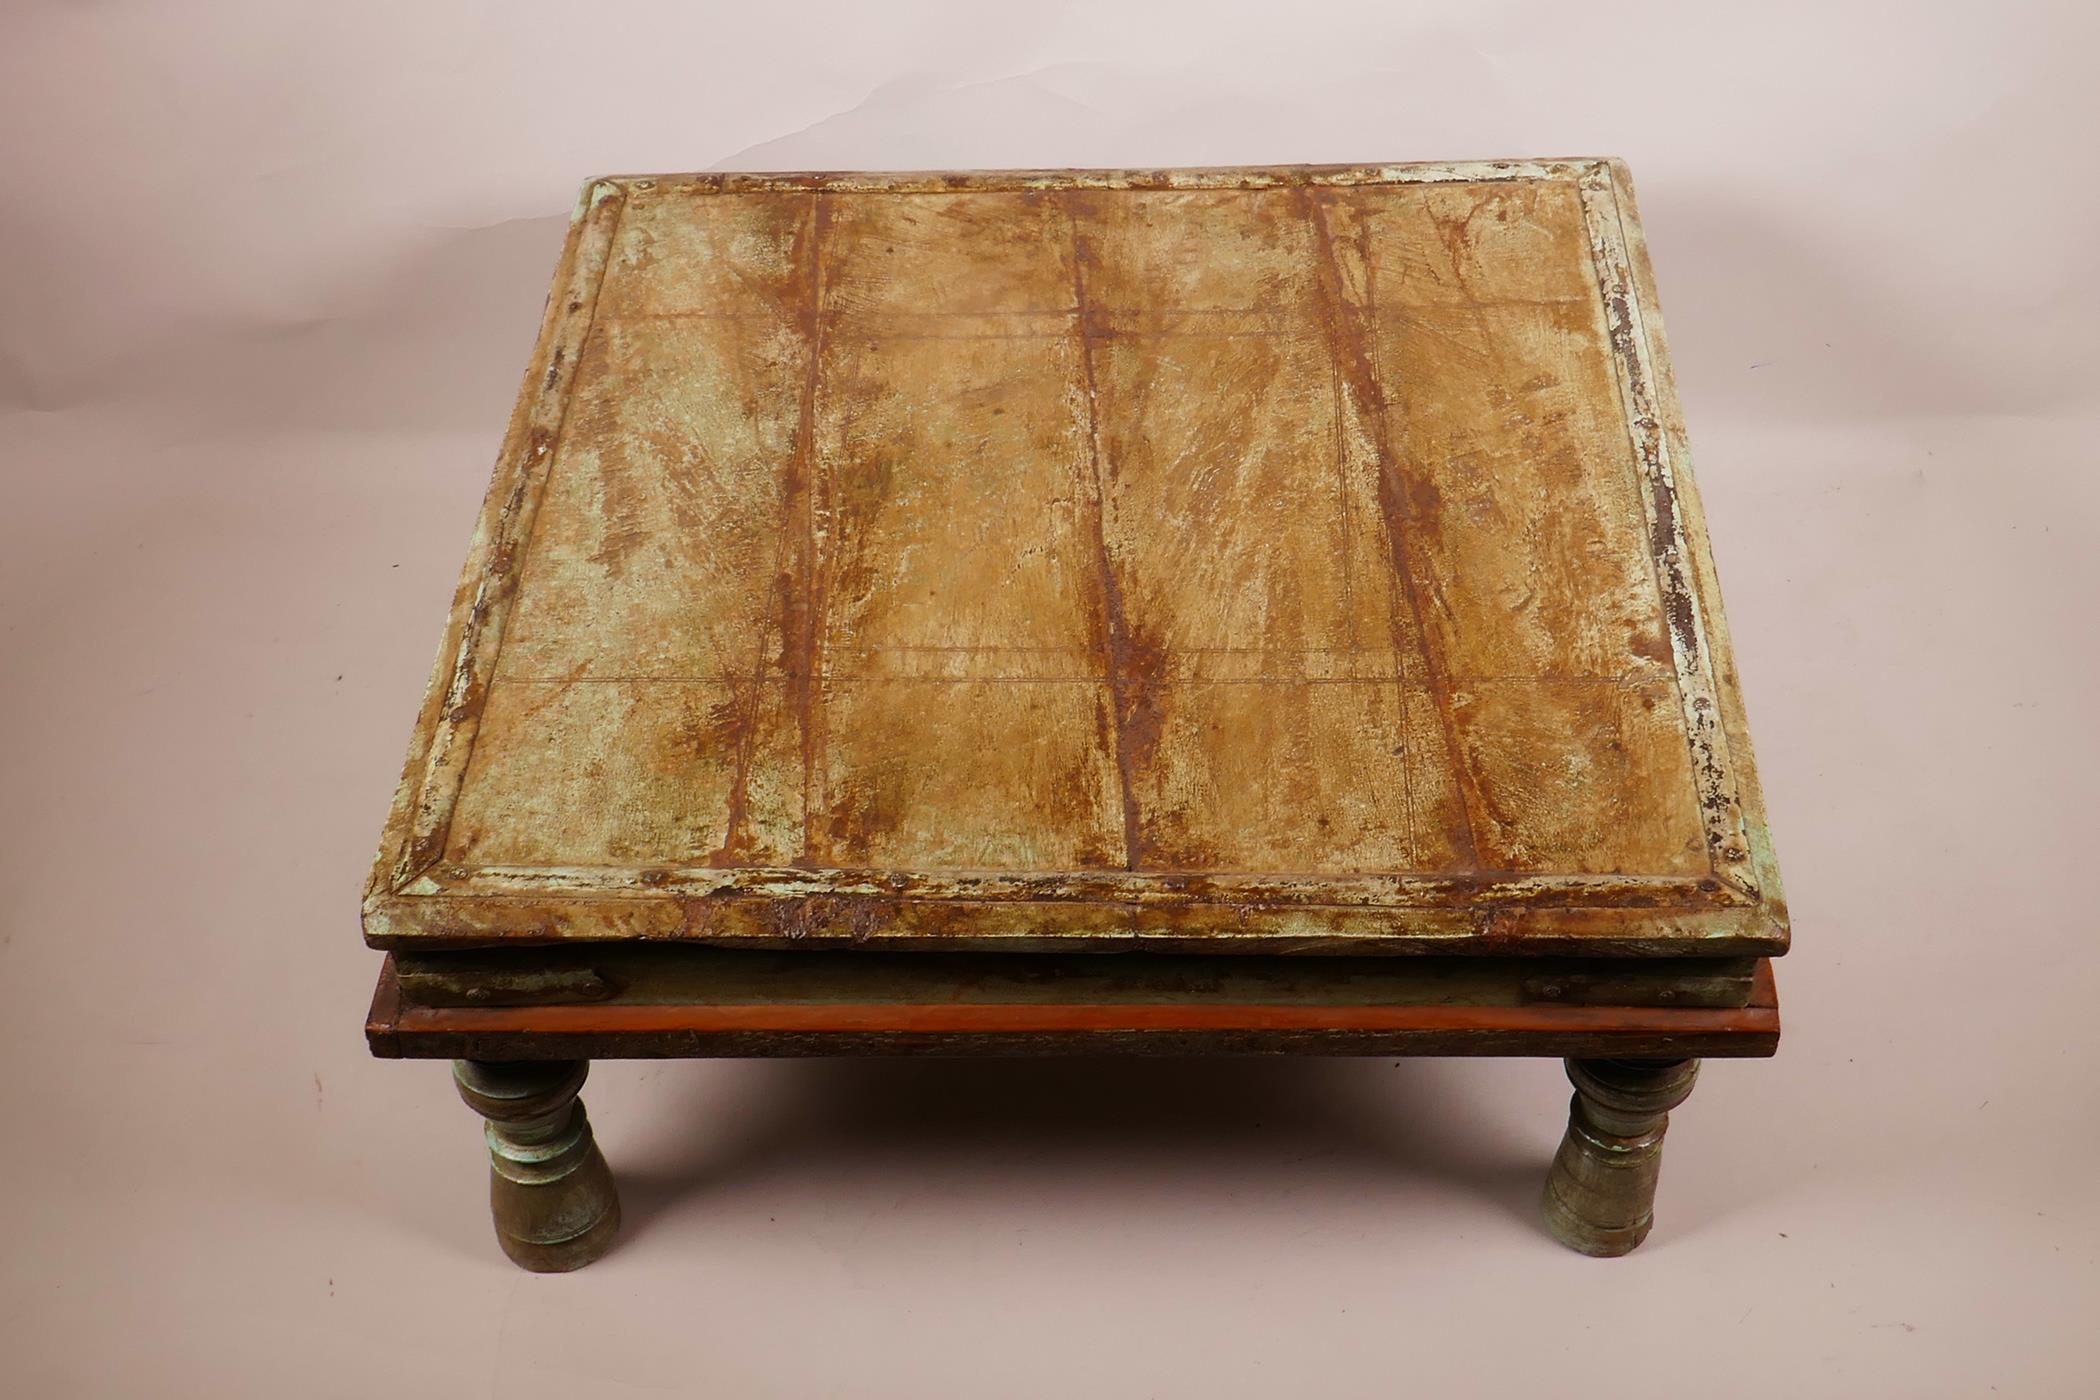 An Indian painted hardwood low coffee table, 17" x 17", 7½" high - Image 2 of 2